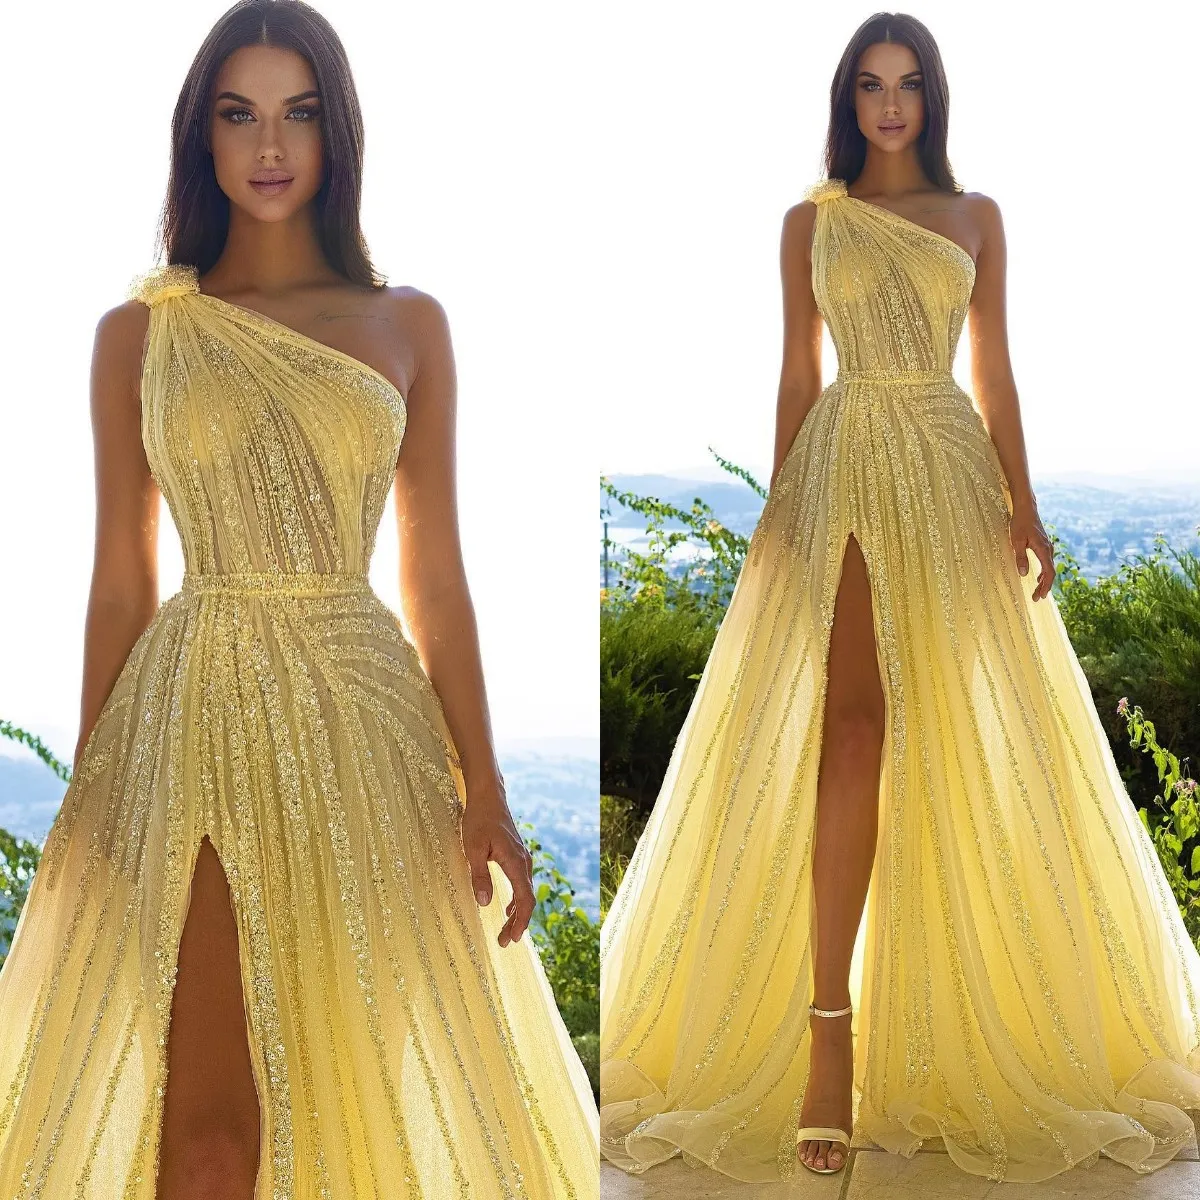 One Shoulder Yellow Prom Dresses 2022 Sequined Beaded Sexy High Side Split Formal Evening Occasion Gowns For Arabic Women Vestdidos De Novia